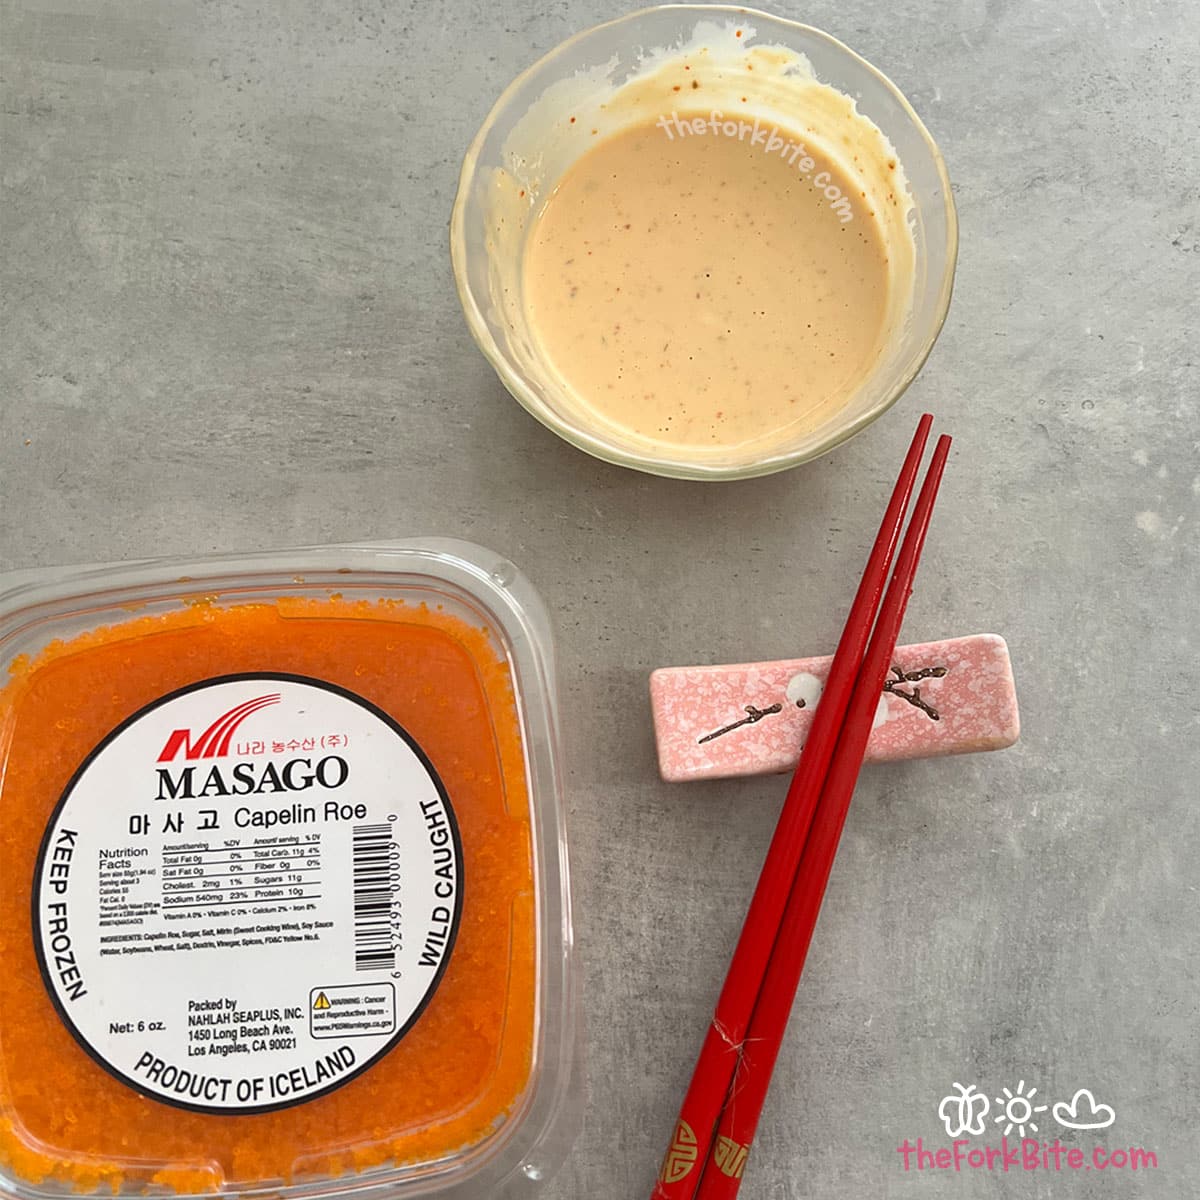 Tobiko sauce is one of the most popular sushi sauces, and it's also one of the easiest to make. All you need is some tobiko (flying fish roe), mayonnaise, sour mustard, sriracha sauce, rice vinegar, and lime juice. Mix all of the ingredients and enjoy!